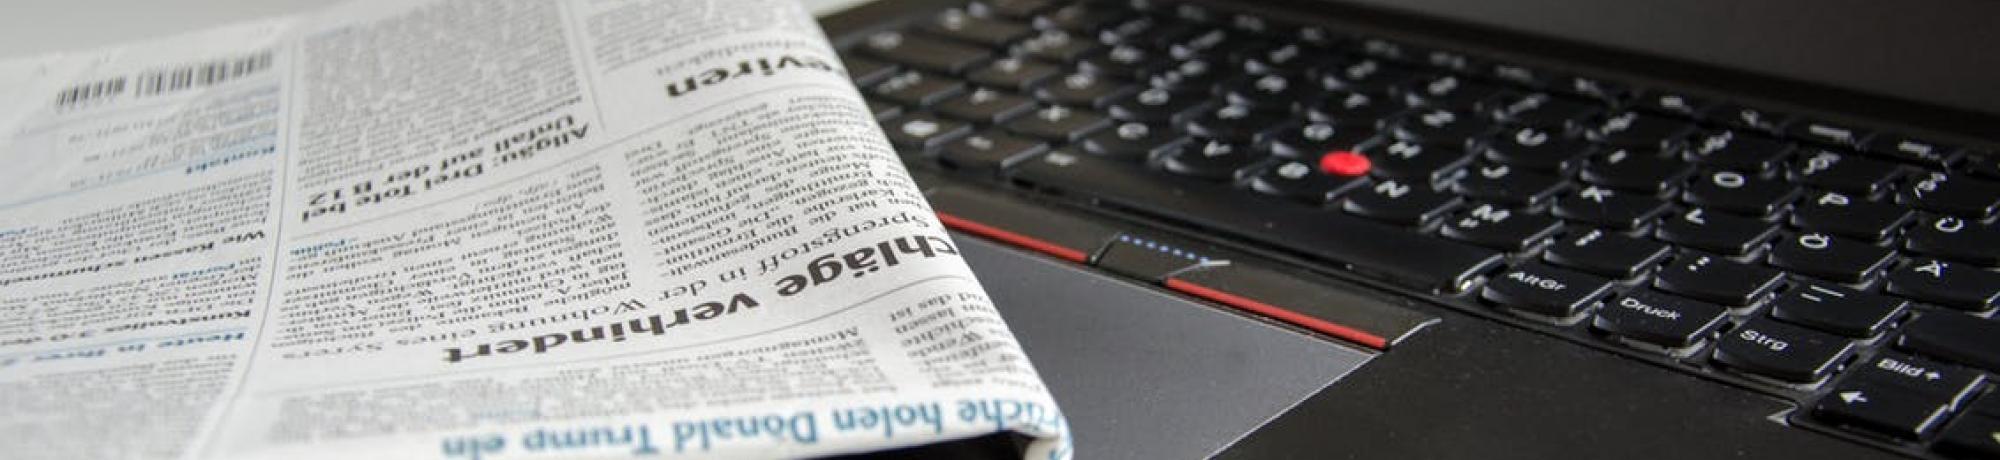 Newspaper rolled up and sitting on computer keyboard